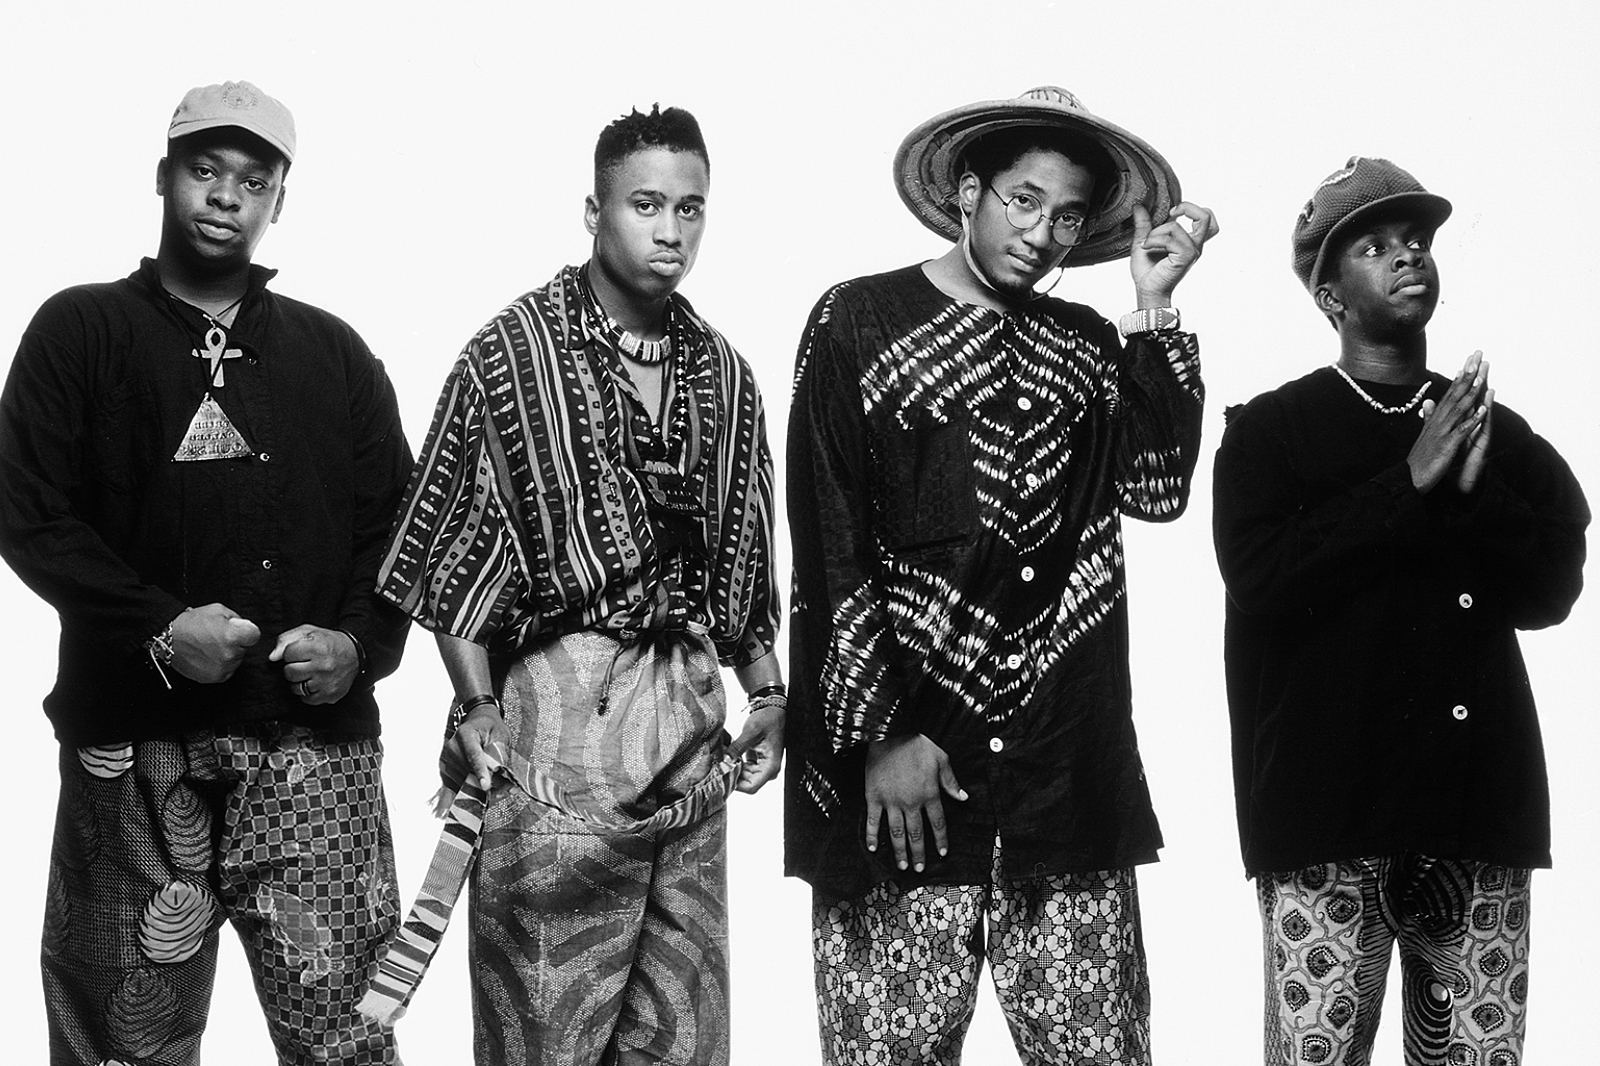 A Tribe Called Quest’s new LP on course for #1 in the US album charts